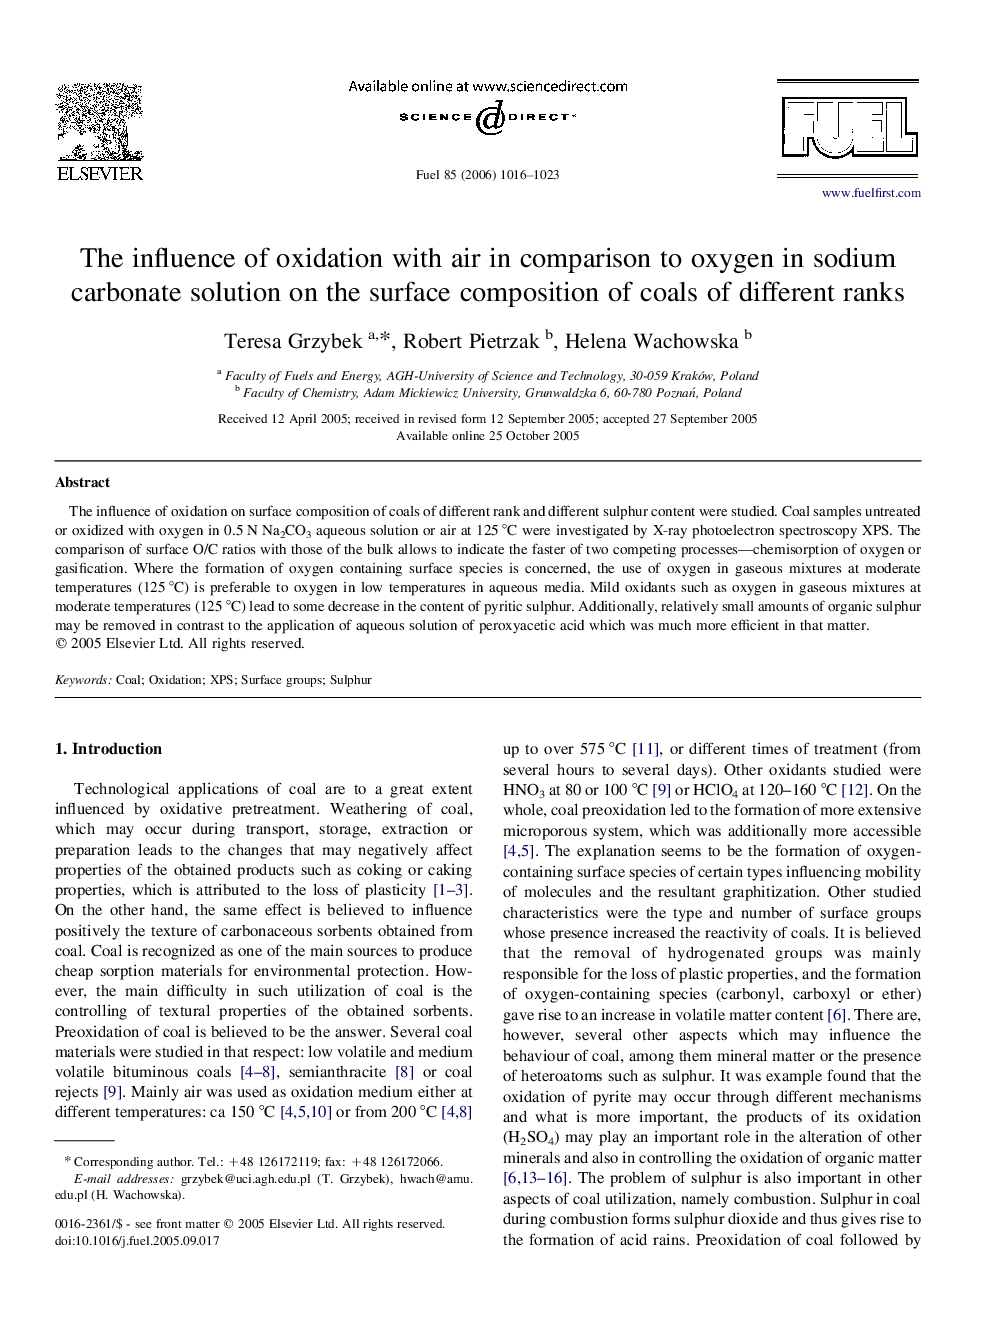 The influence of oxidation with air in comparison to oxygen in sodium carbonate solution on the surface composition of coals of different ranks